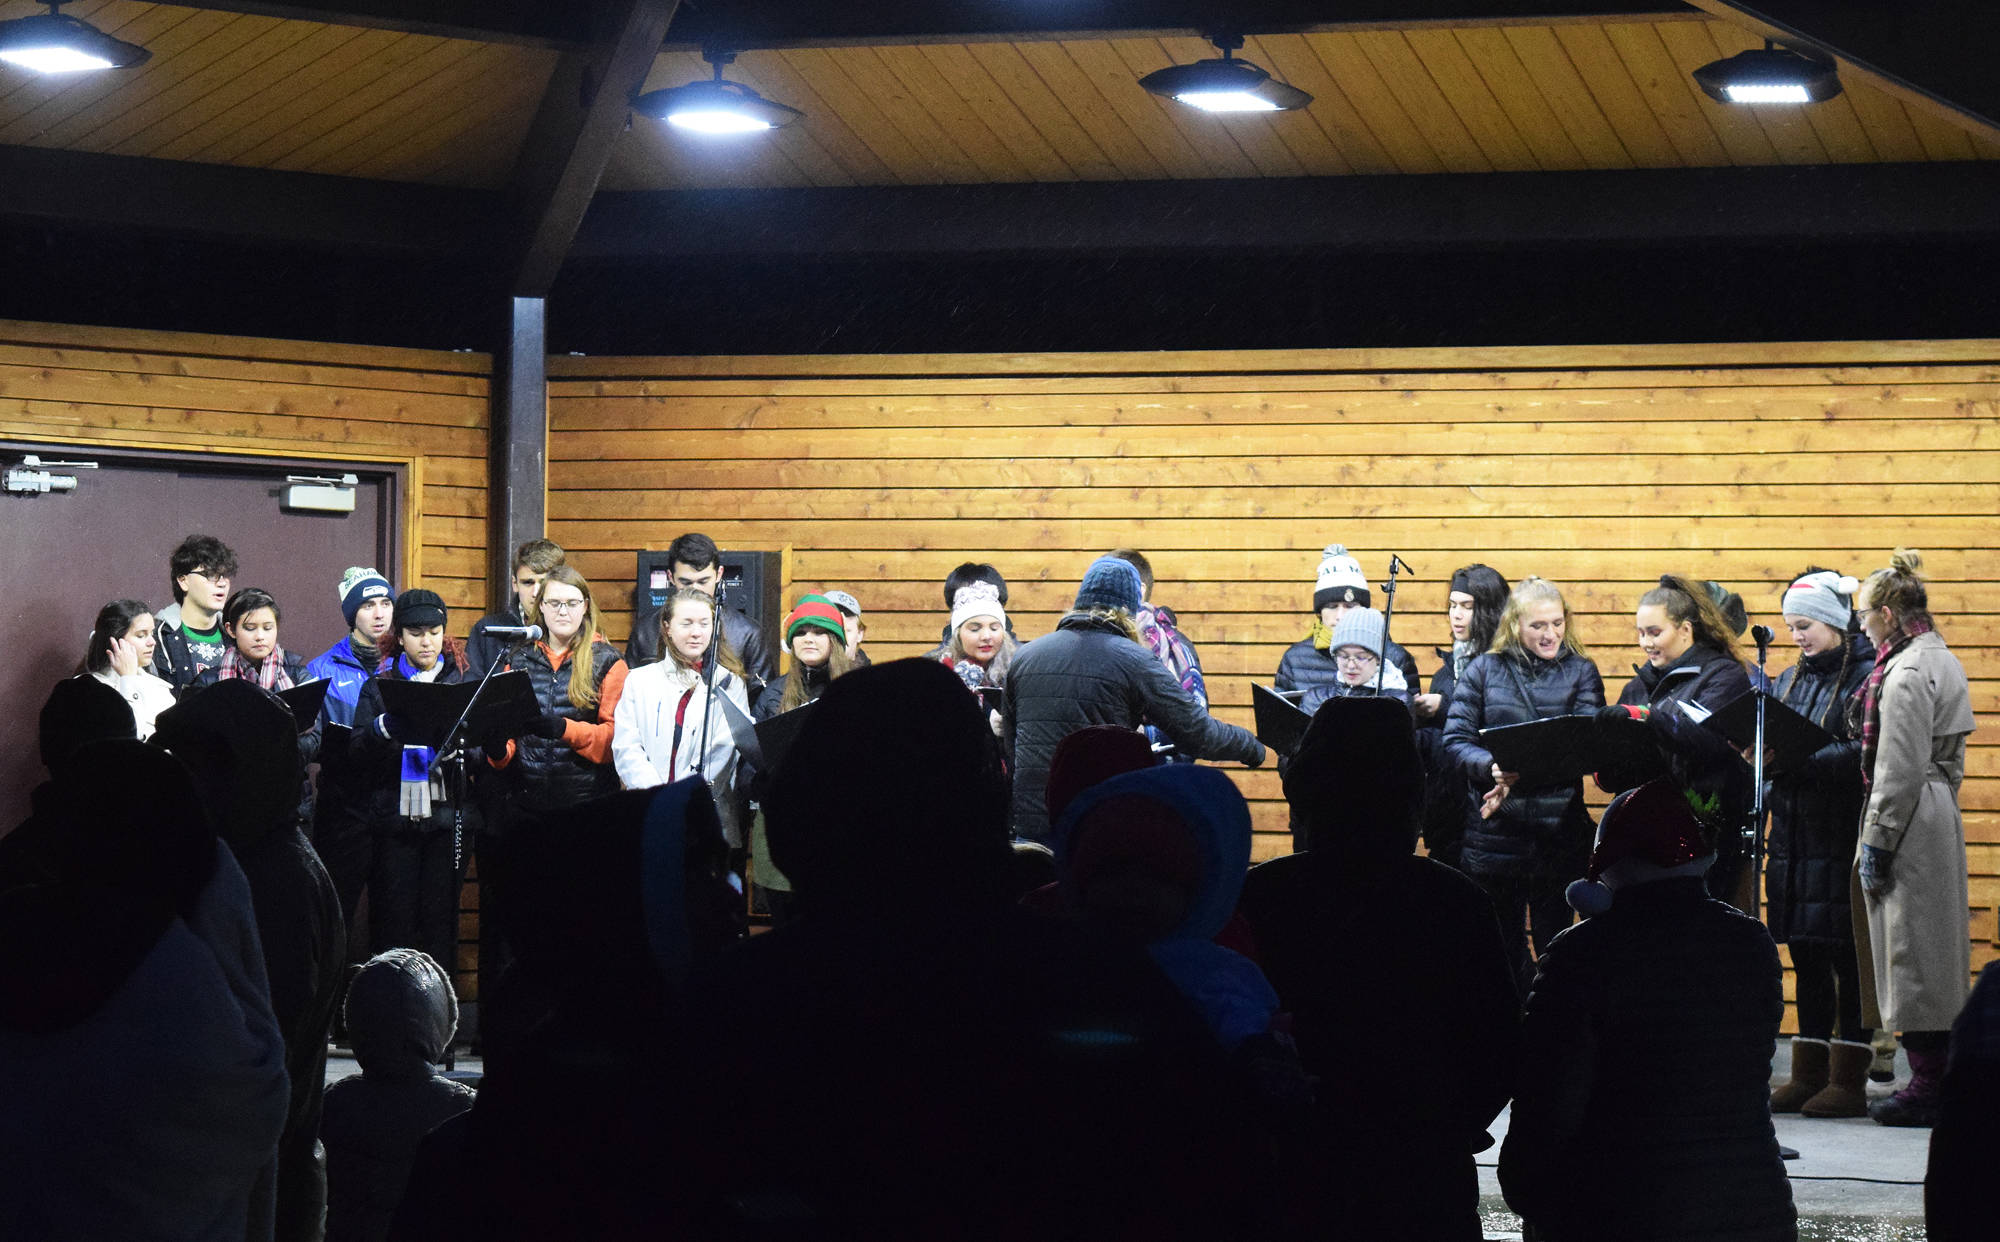 Members of the Kenai Central High School choir treat guests to holiday music Saturday, Dec. 1 at the Christmas in the Park tree-lighting ceremony at Soldotna Creek Park, in Soldotna, Alaska.. (Photo by Joey Klecka/Peninsula Clarion)